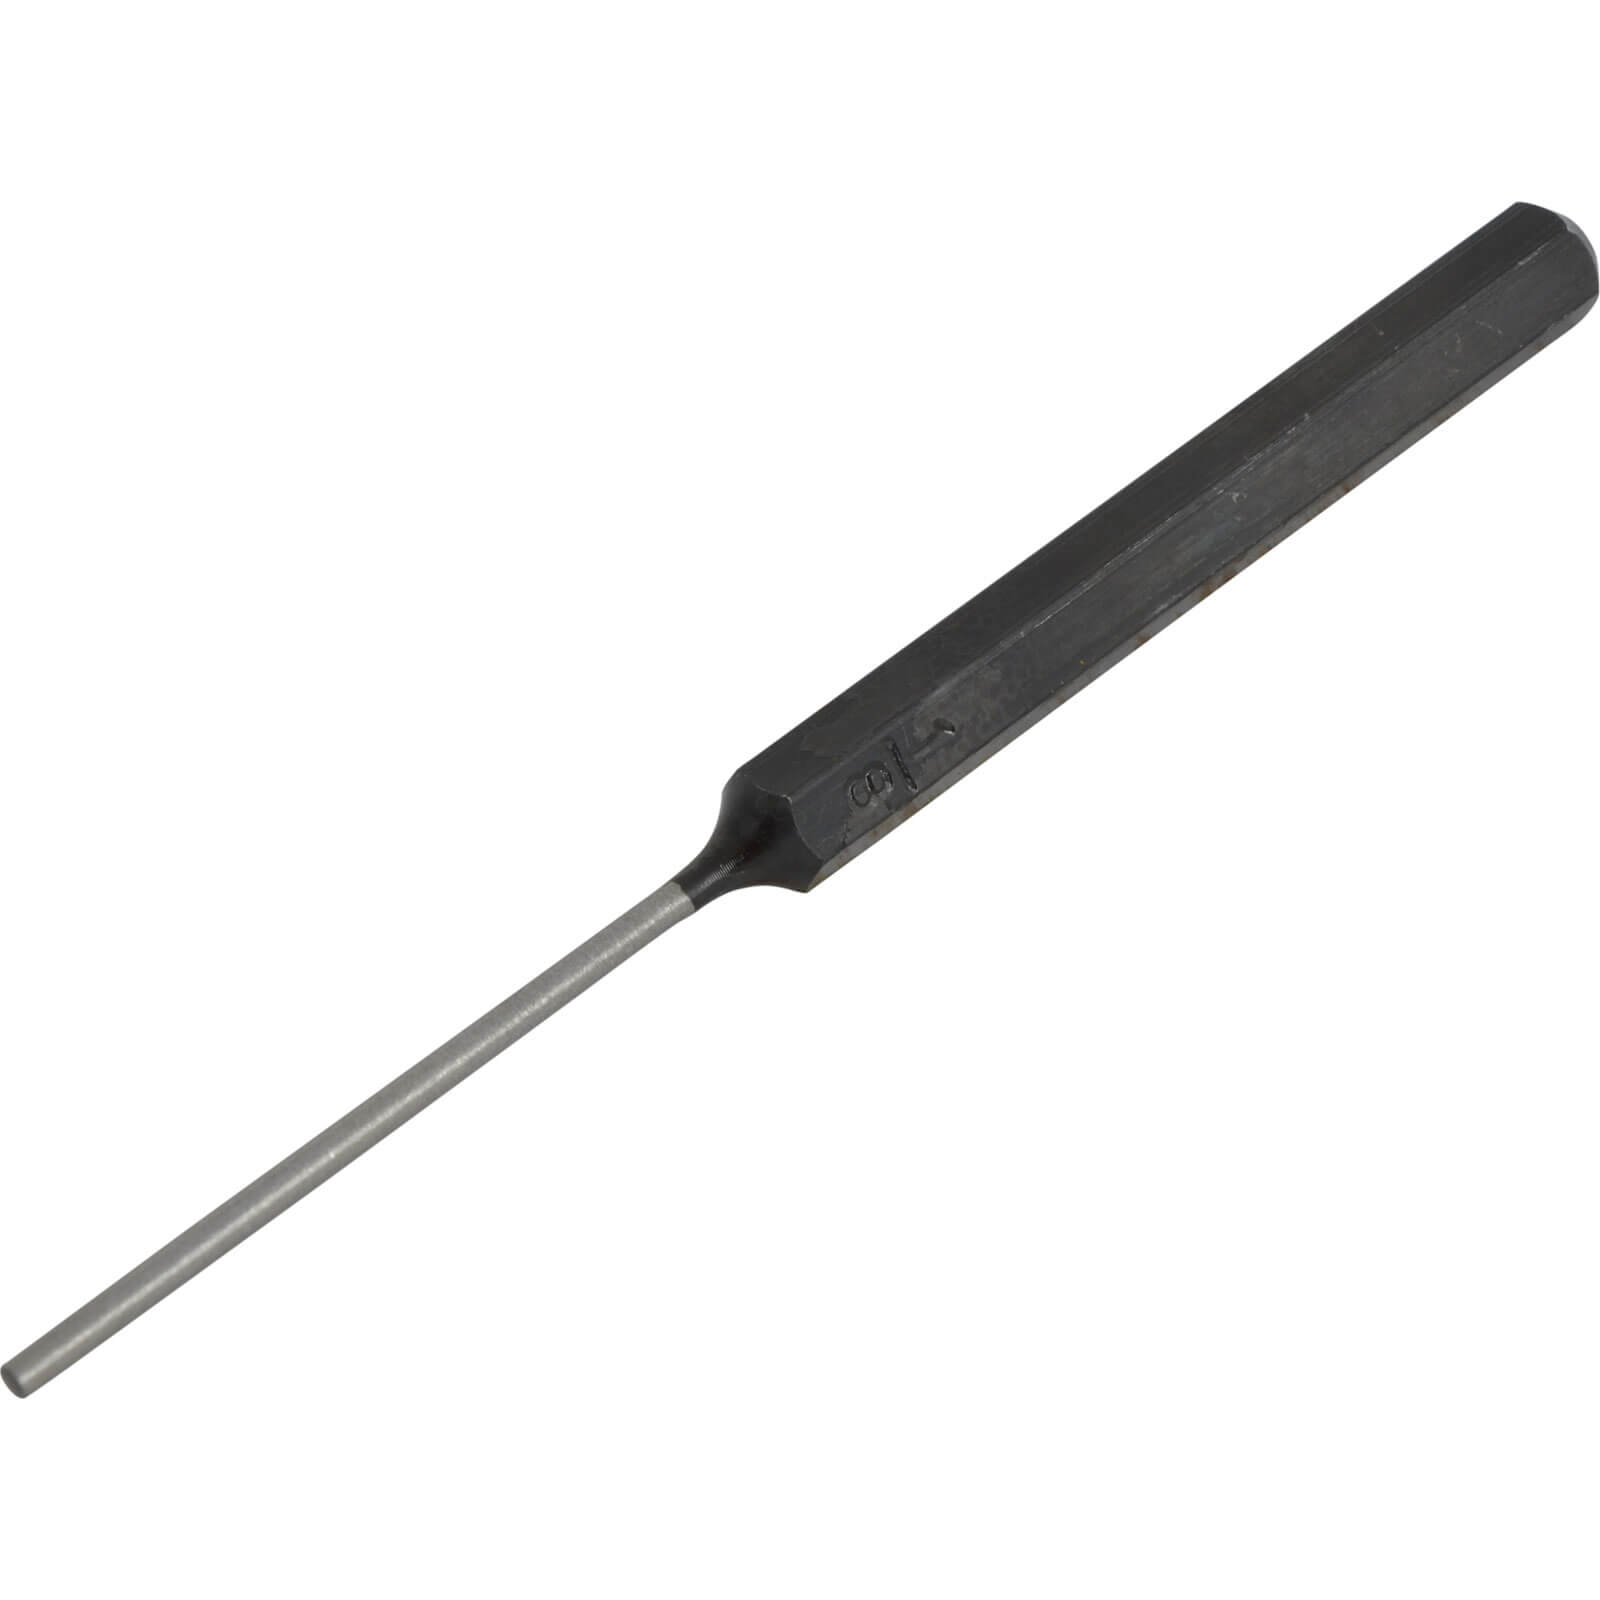 Image of Priory Long Parallel Pin Punch 1/8"